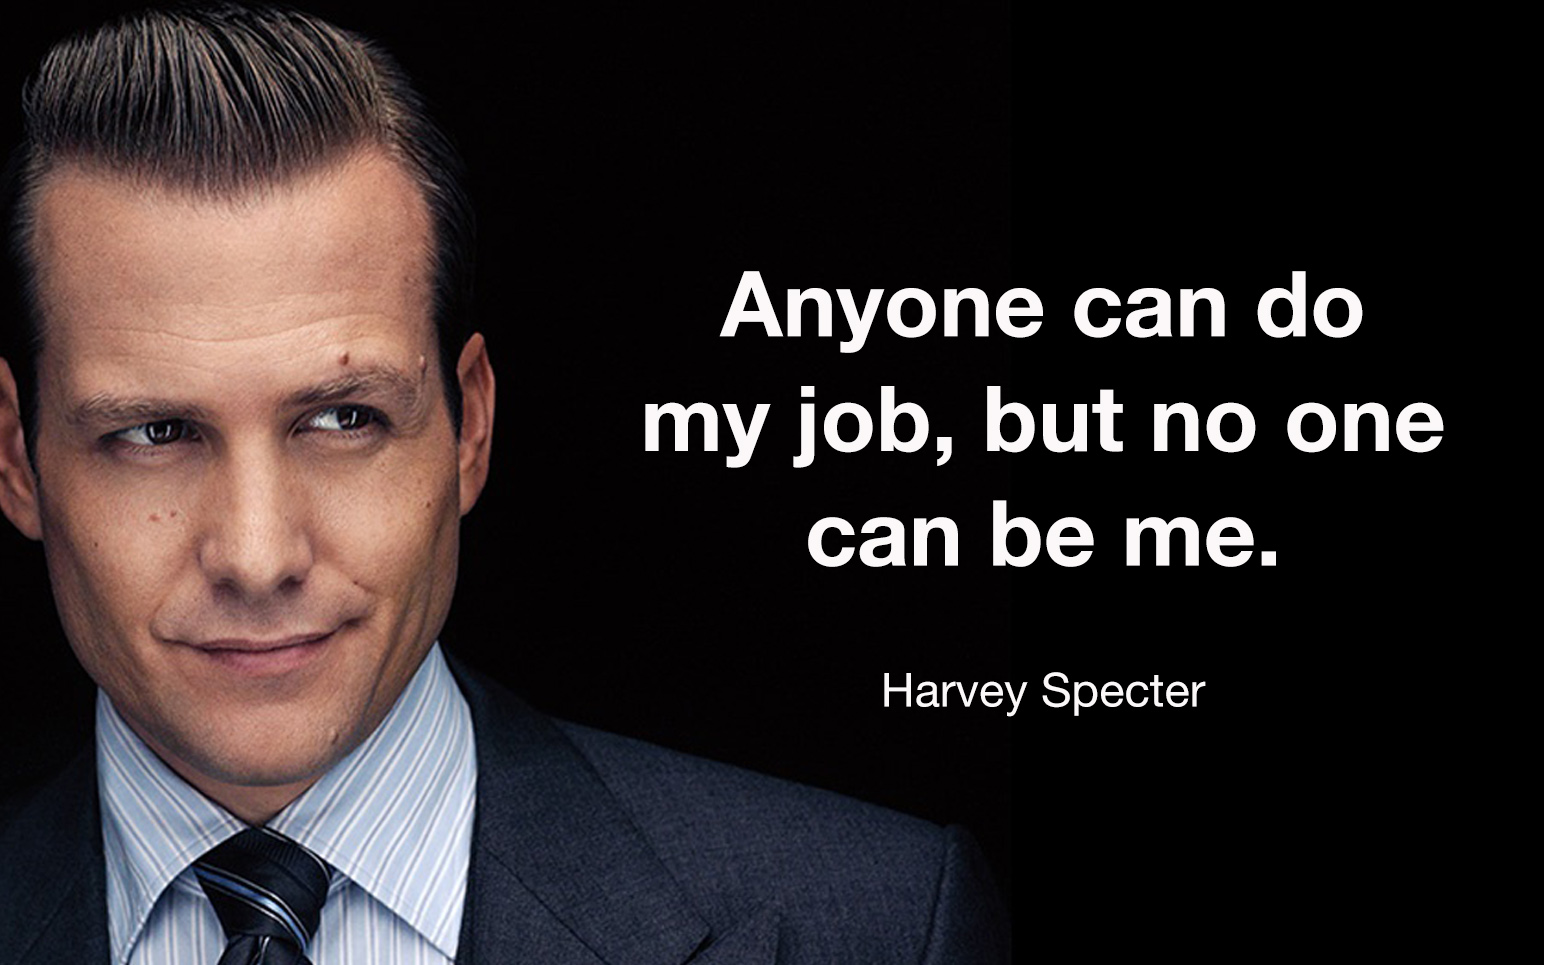 21 Harvey Specter Quotes To Help You Win At Life And